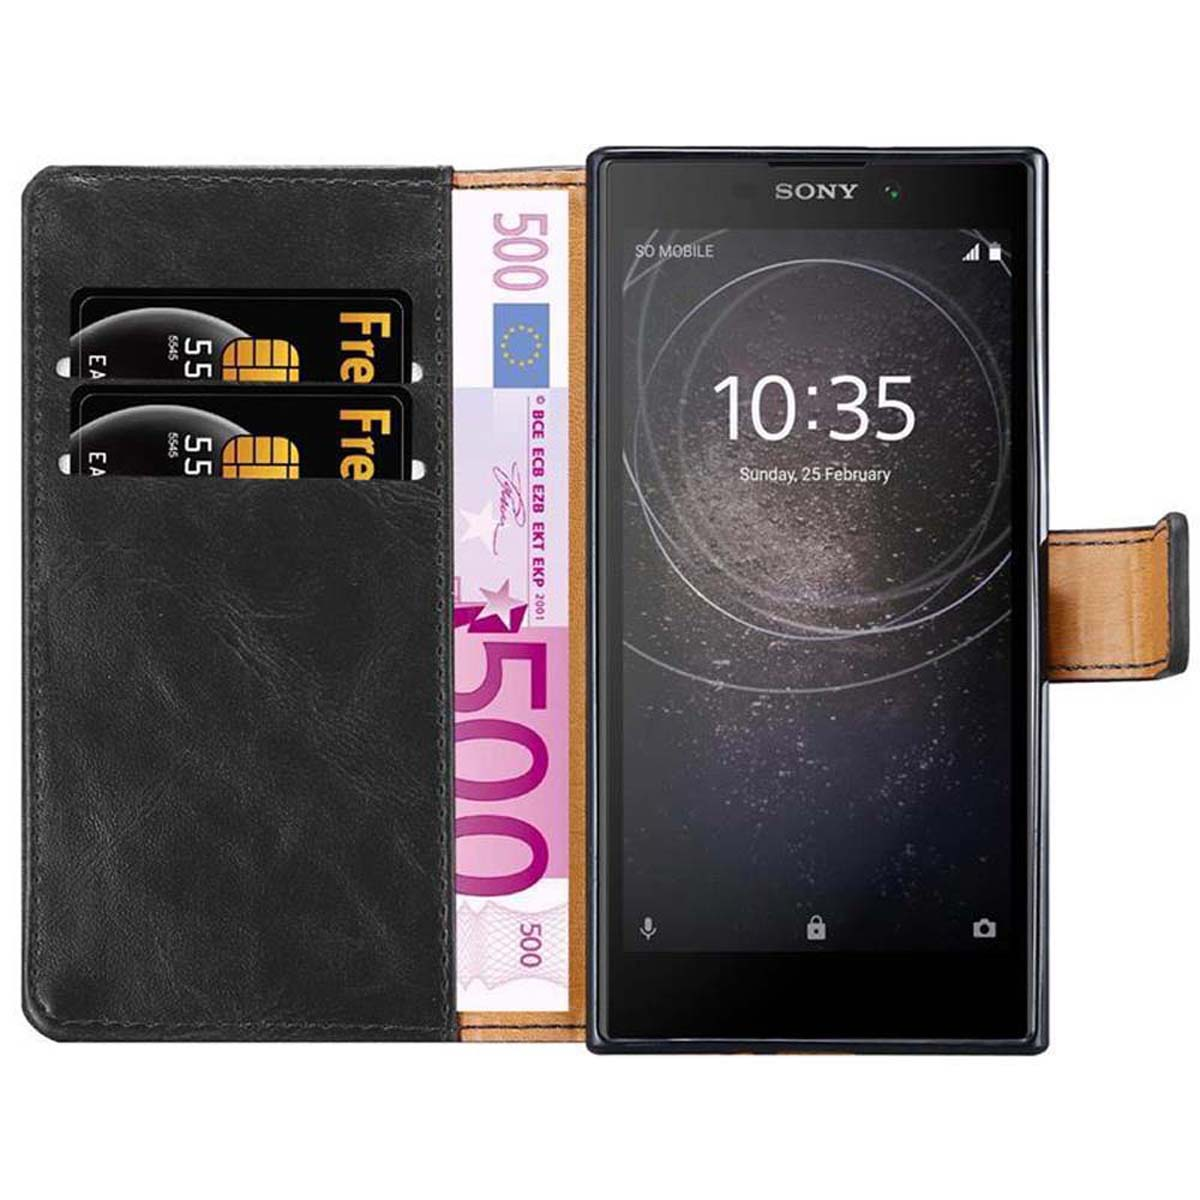 Luxury SCHWARZ GRAPHIT Bookcover, Style, Book CADORABO Sony, L2, Hülle Xperia